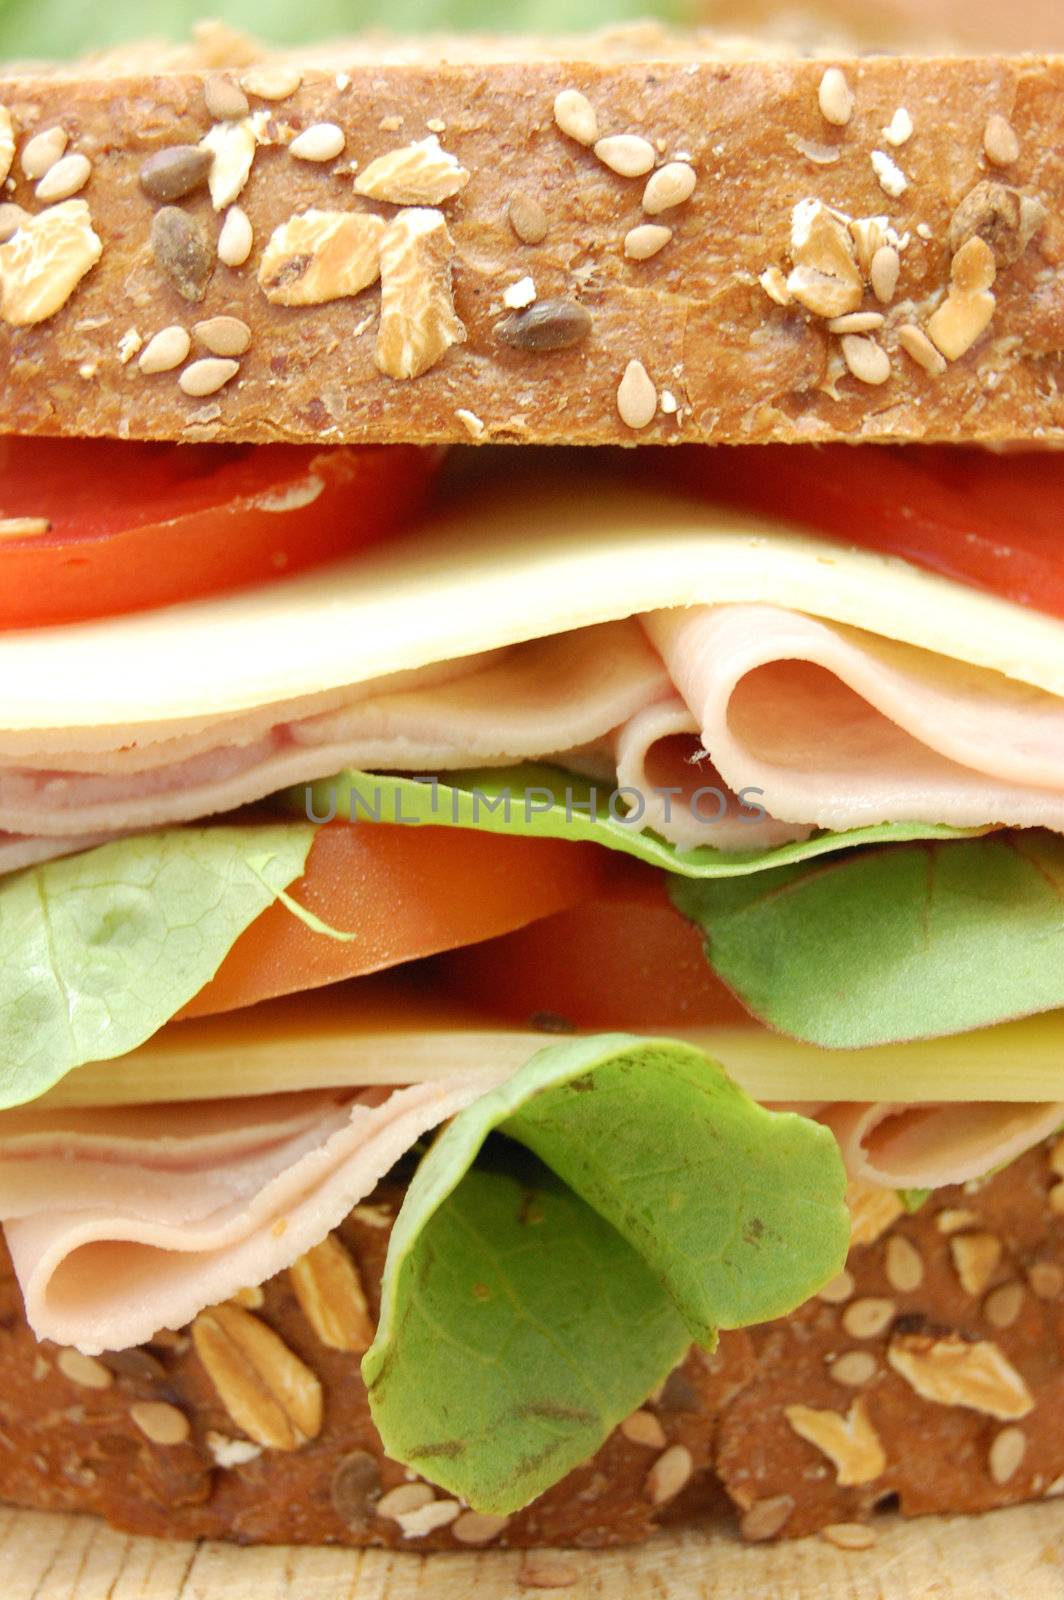 Deli sandwich packed with ingredients